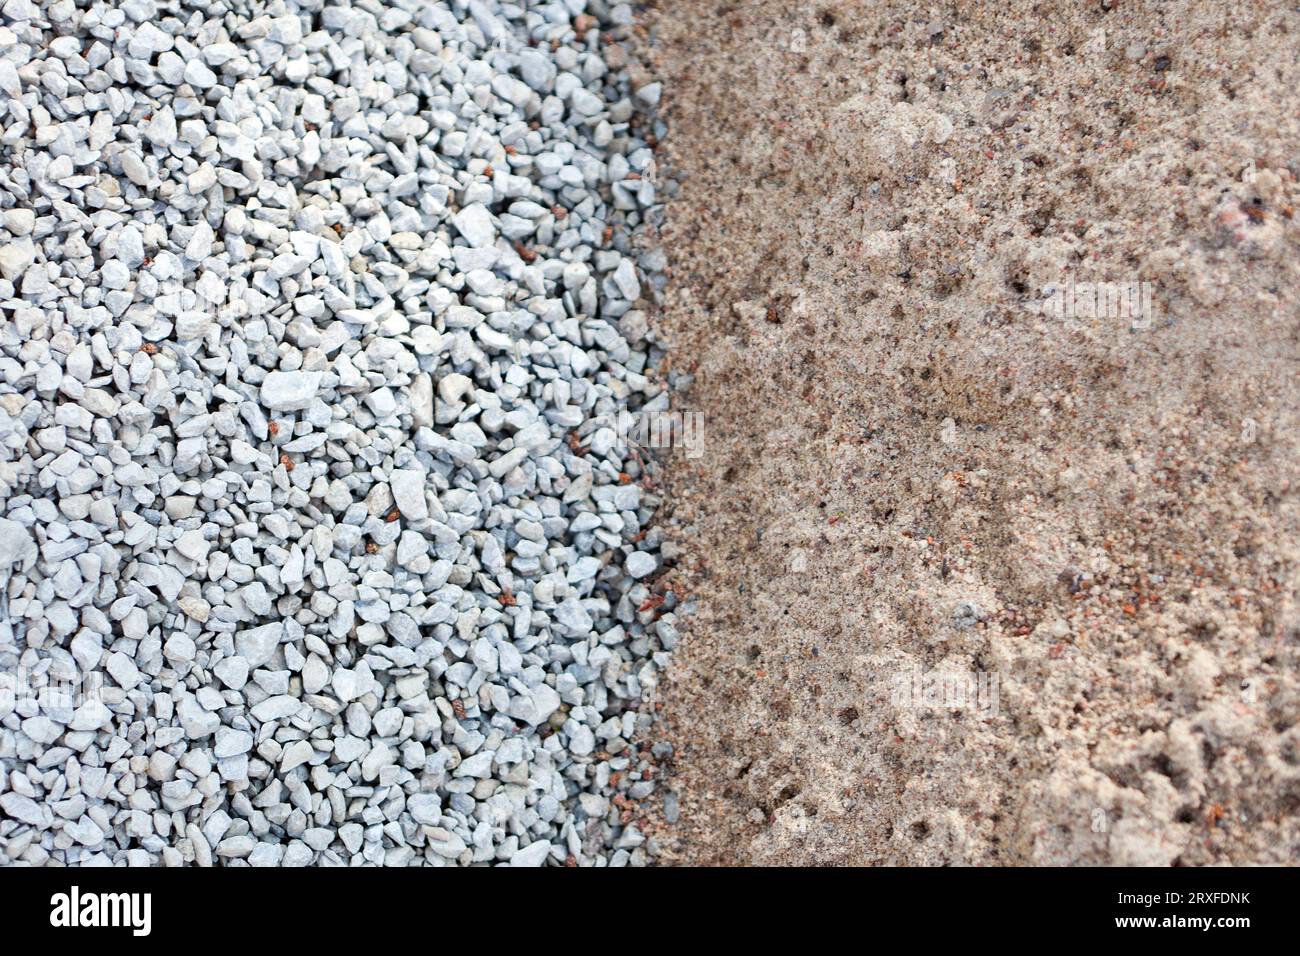 construction materials limeStone and sand background. gravel and macadam. Industrial fraction Crushed gray fines top view Stock Photo